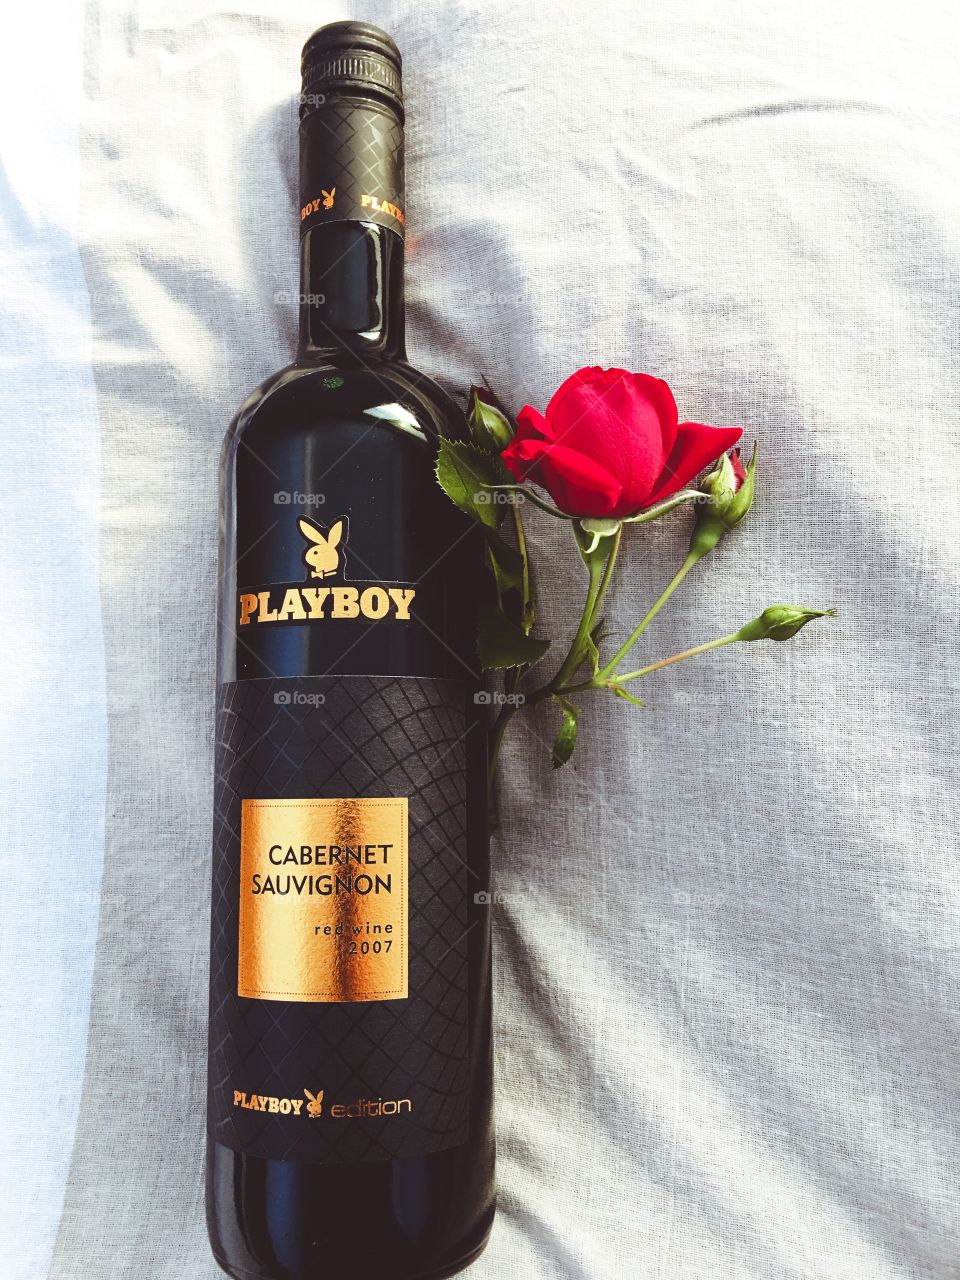 For our moment, Playboy wine